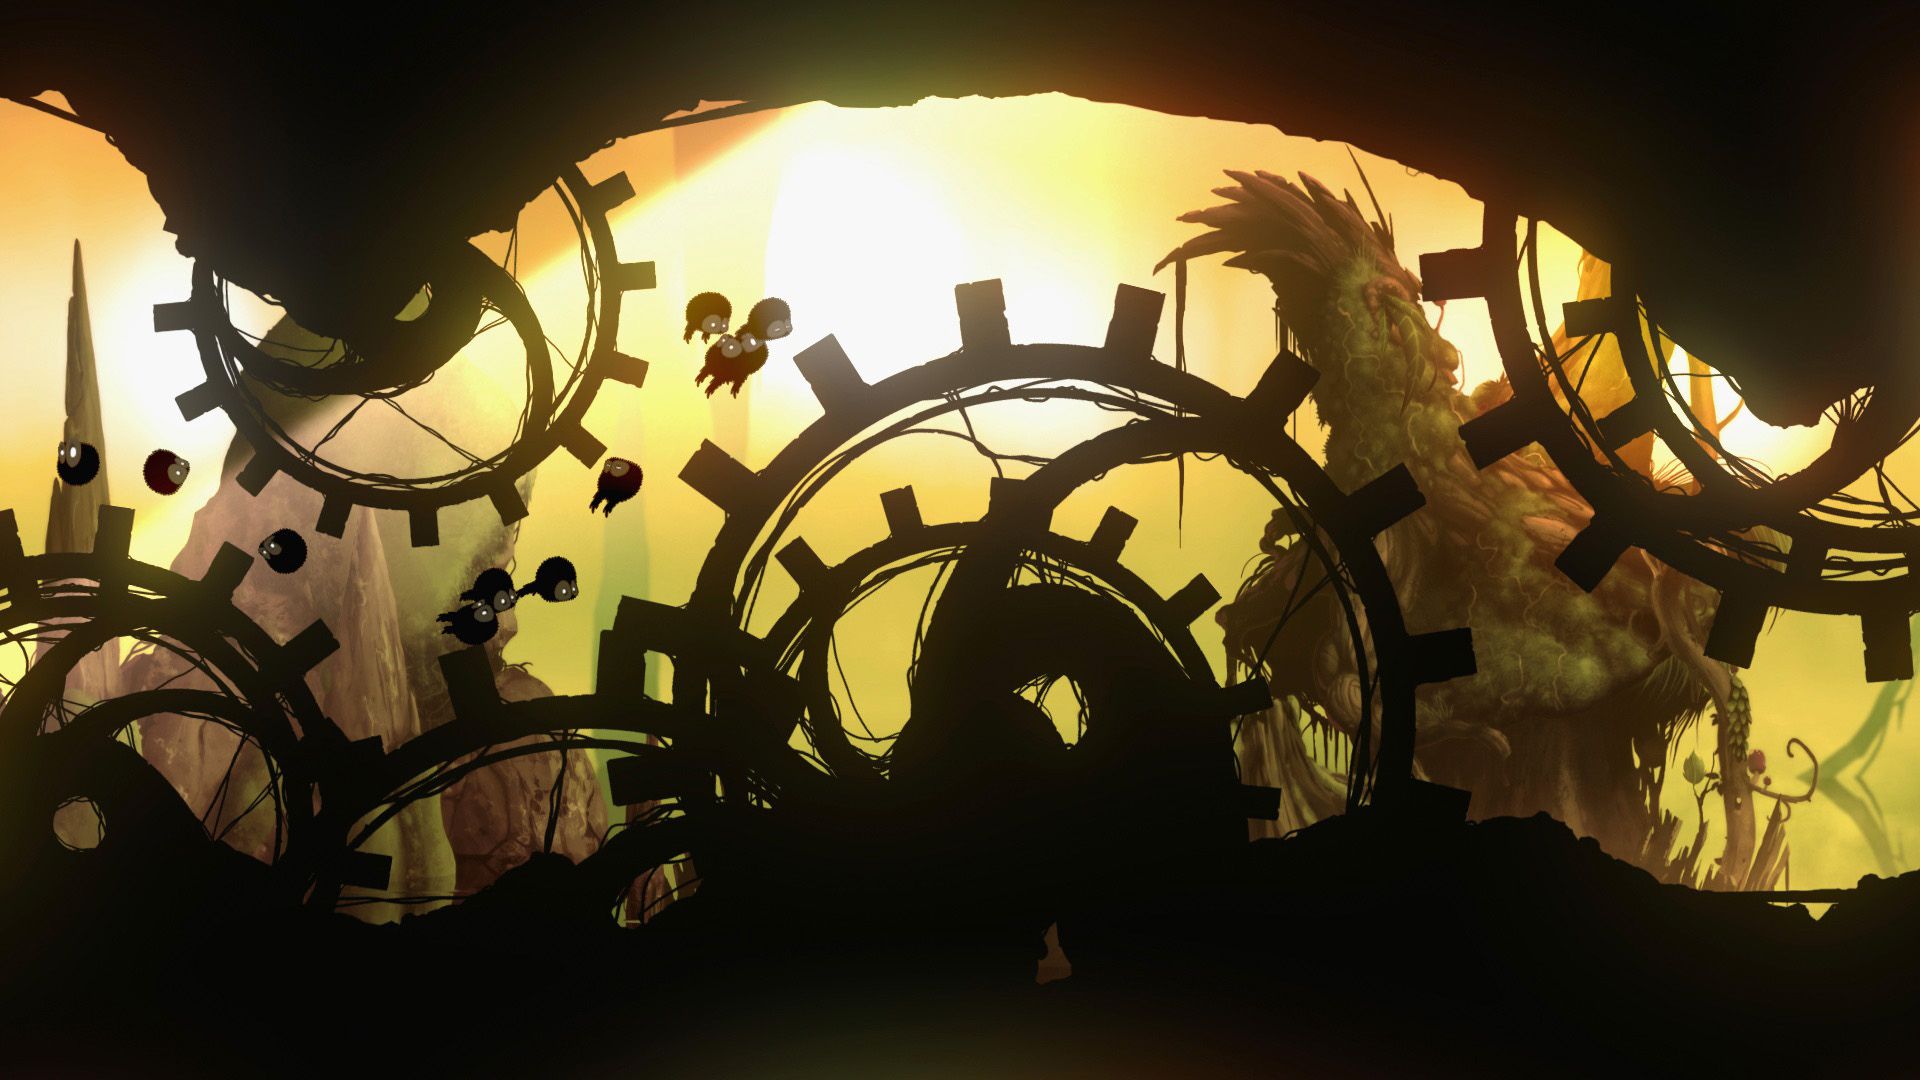 BADLAND is one of the best offline games for 3 players.